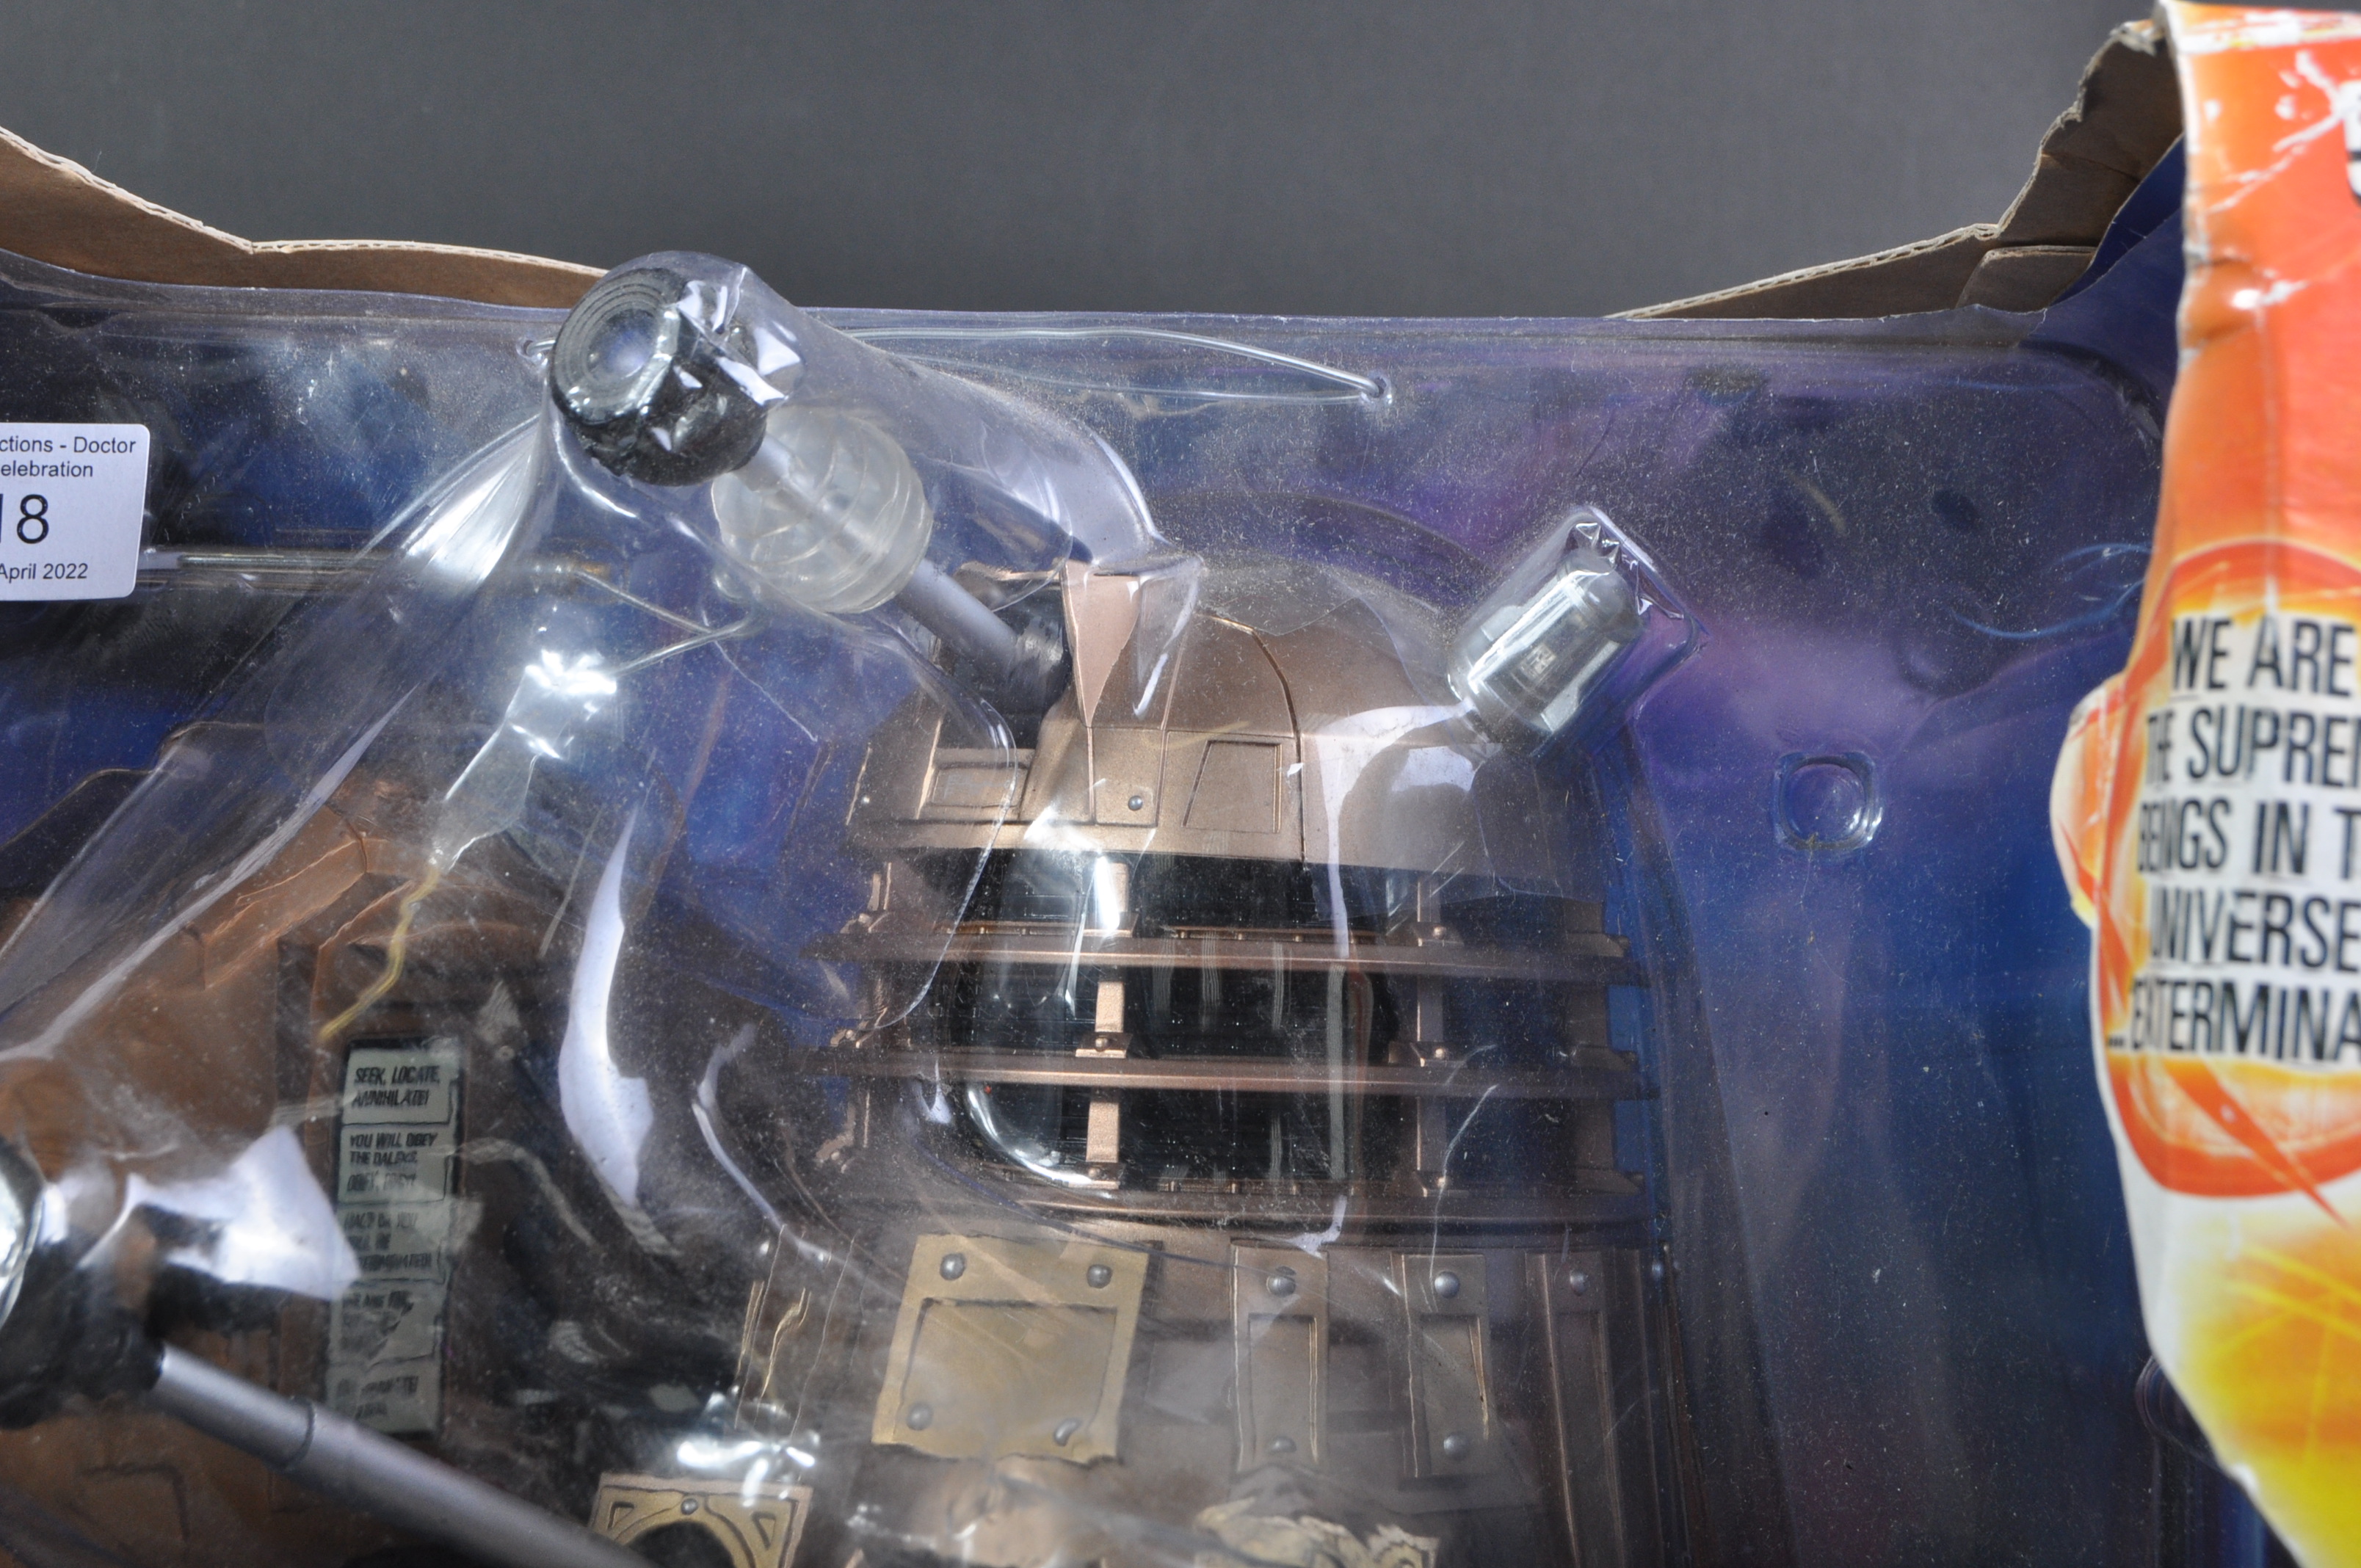 DOCTOR WHO - CHARACTER - LARGE SCALE RADIO CONTROLLED DALEK - Image 2 of 6